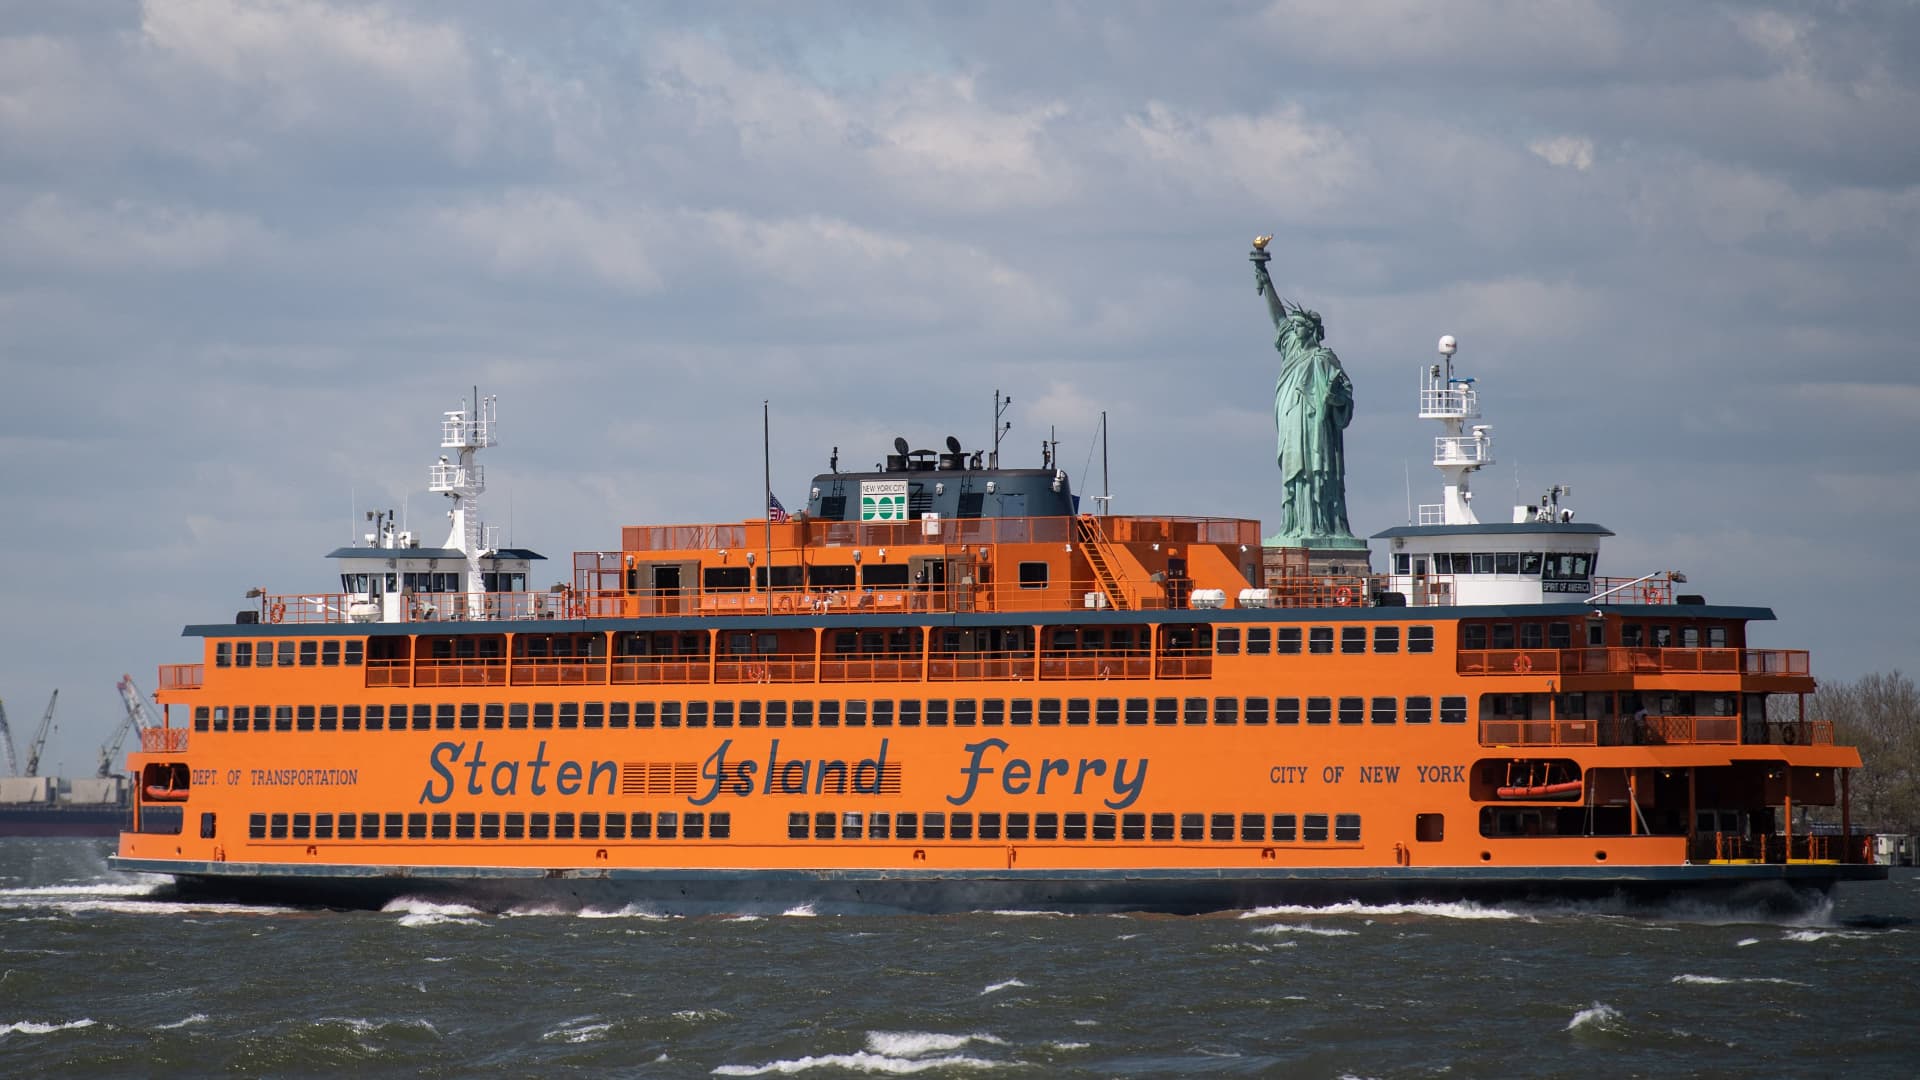 The Staten Island Ferry passes in front of the Statue of Liberty as seen from Governors Island on April 30, 2021 in New York City.